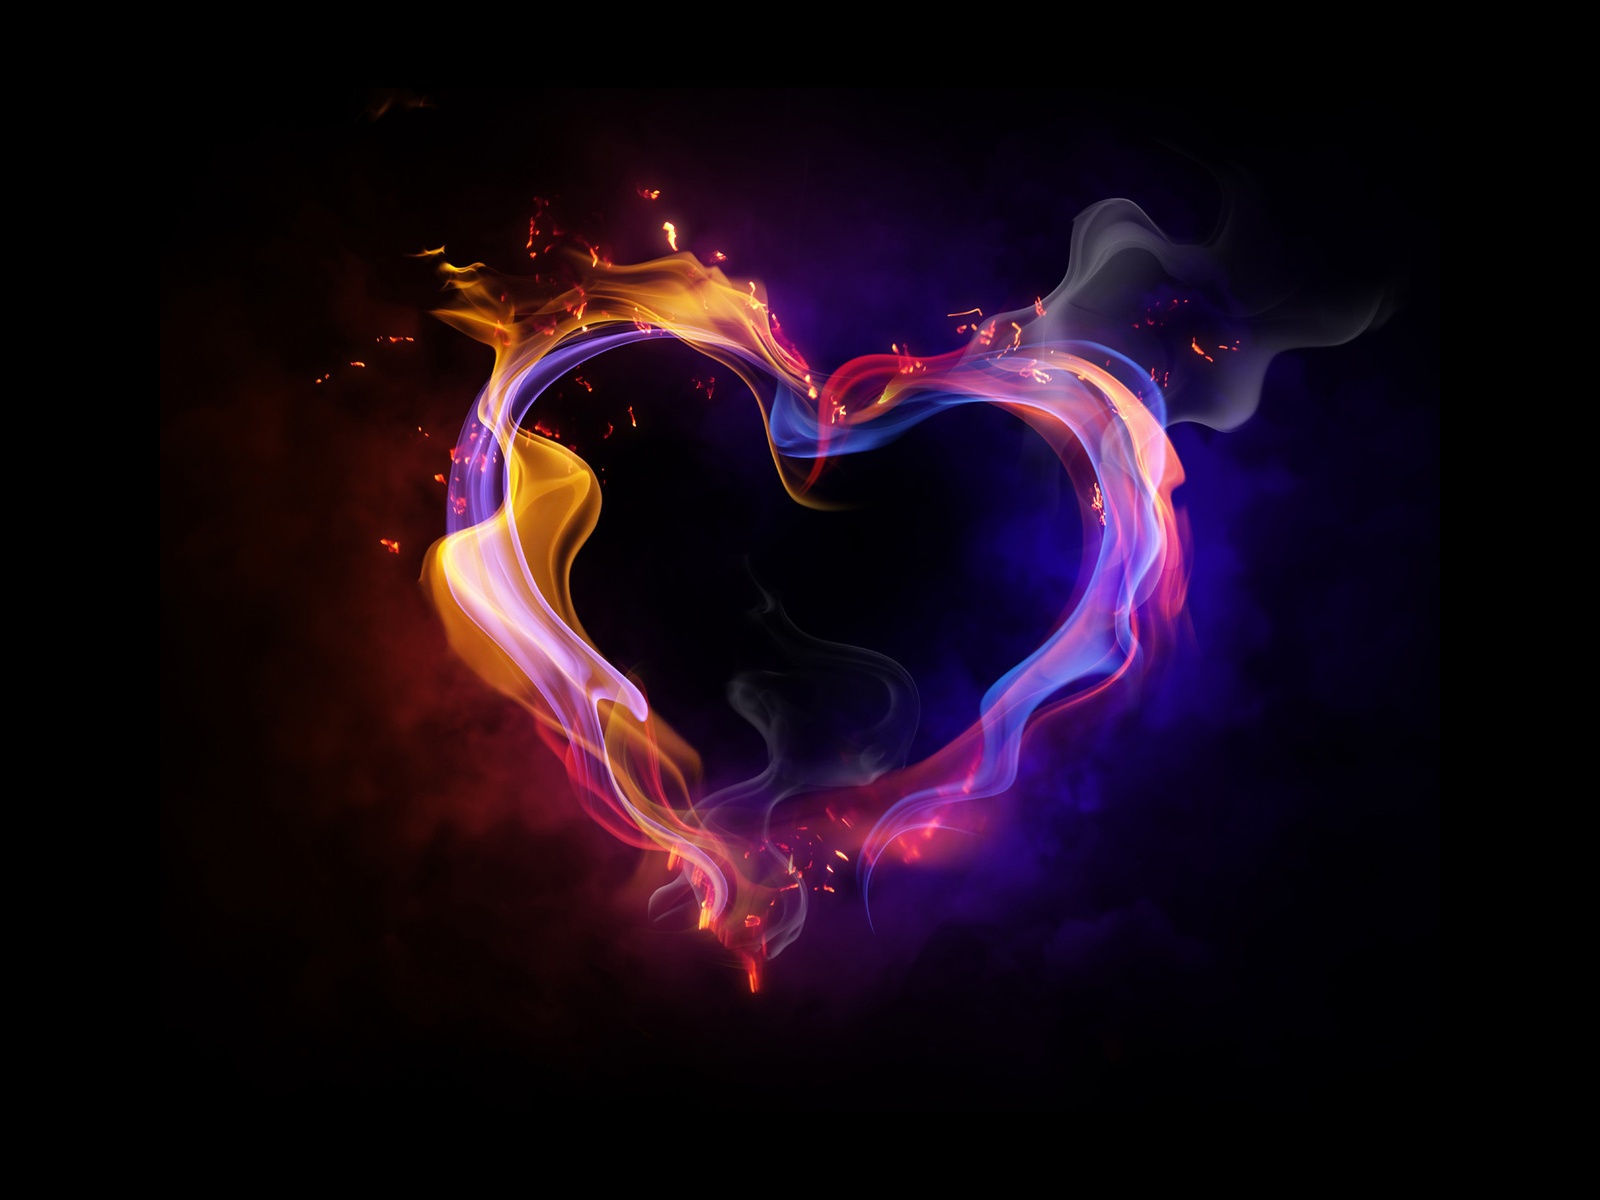 Love Fire Awesome HD Wallpaper High Quality